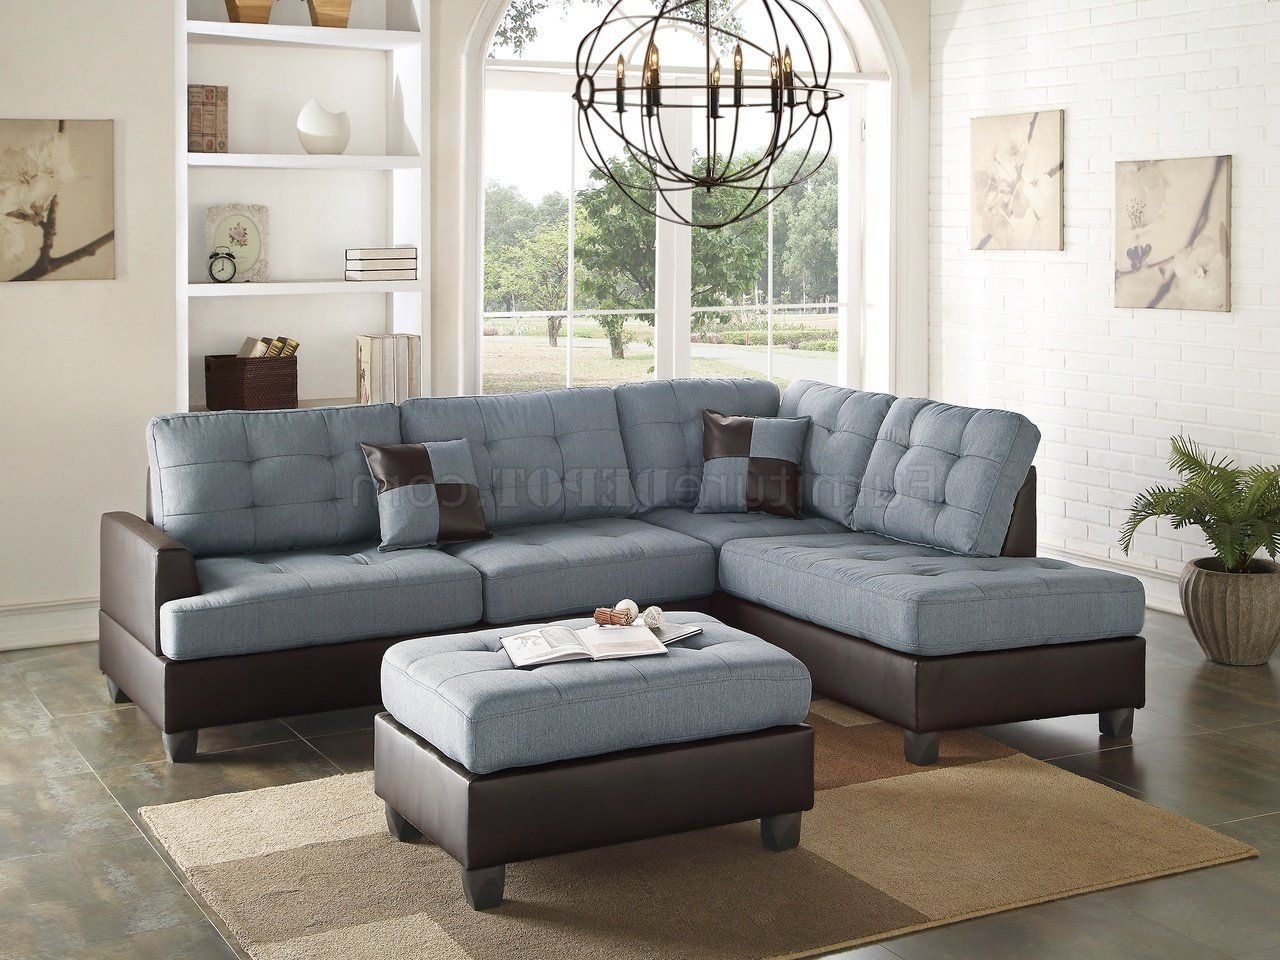 Most Current Sectional Sofas In Gray Inside F6858 Sectional Sofa 3pc In Grey Fabricboss (View 2 of 25)